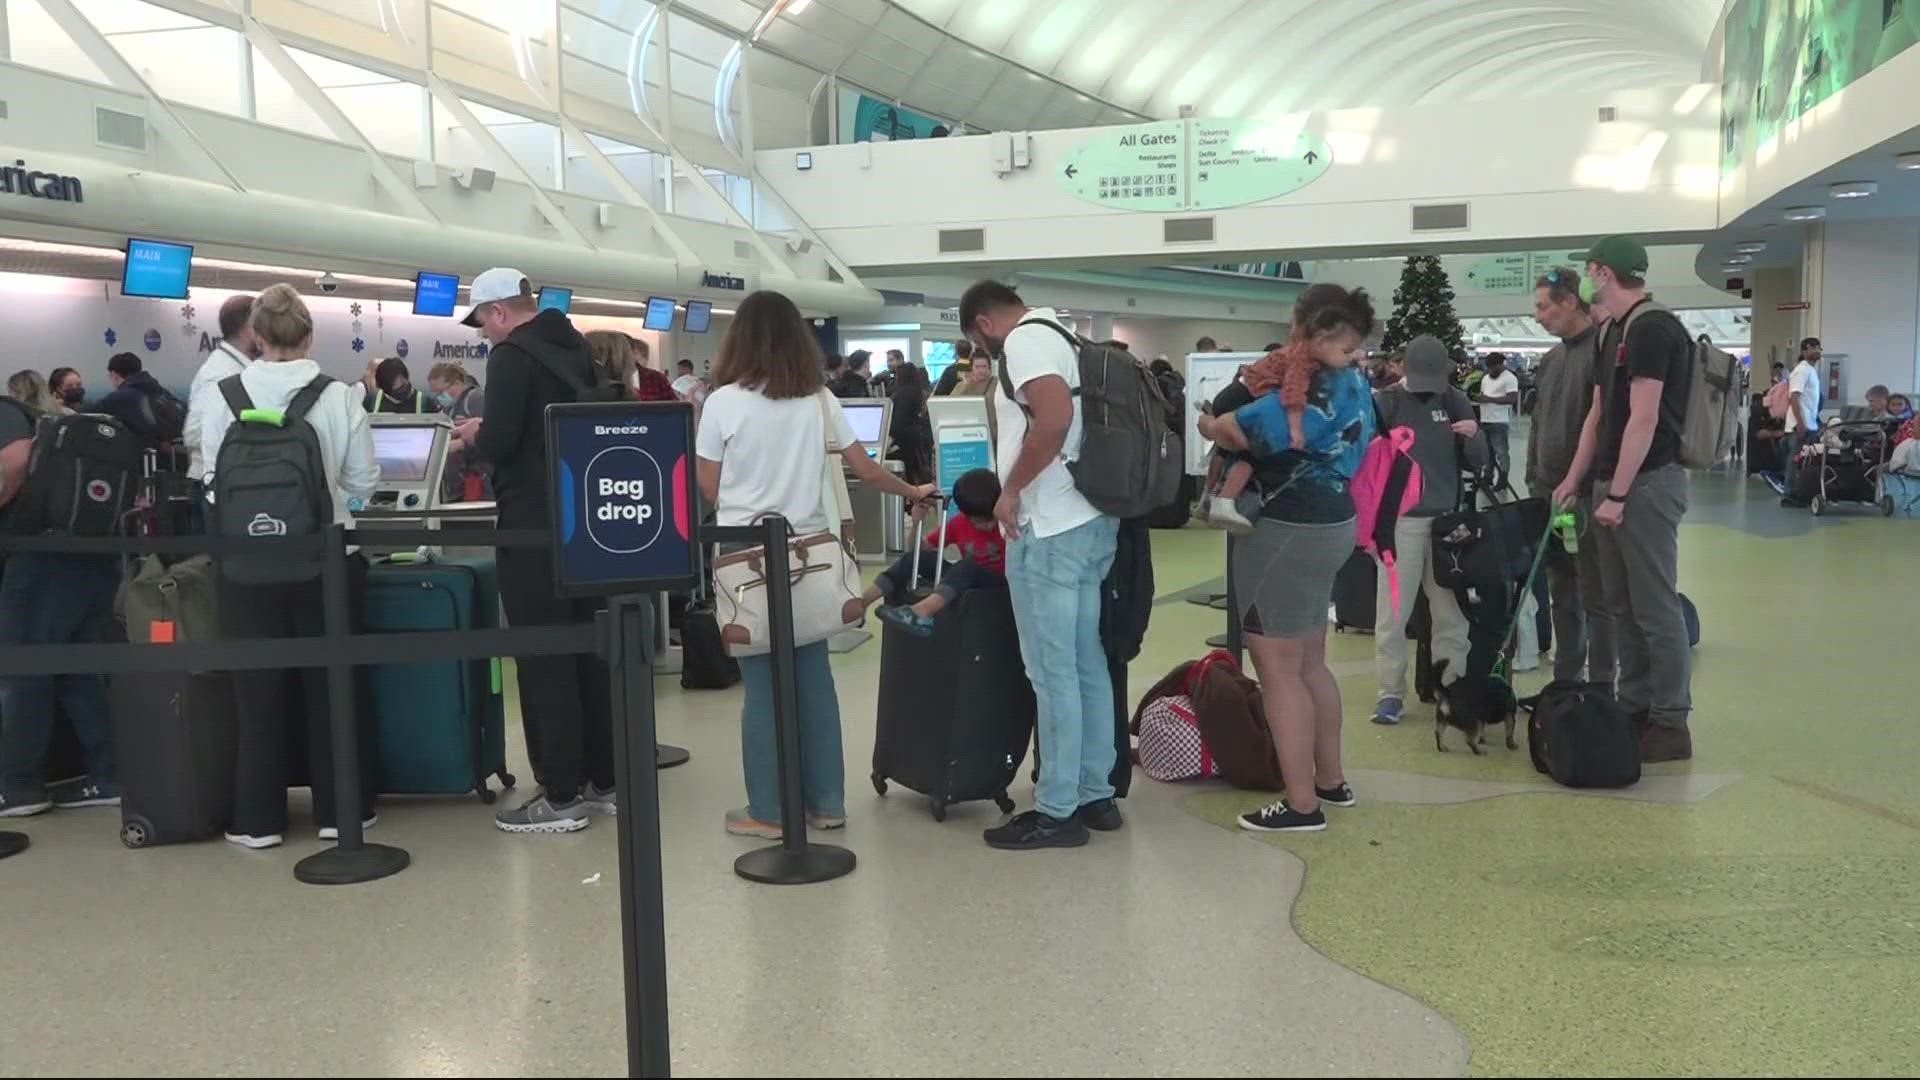 The computer issue, mixed with an already busy travel day and airlines still catching up from last week, amounted in a frustrating day for travelers.